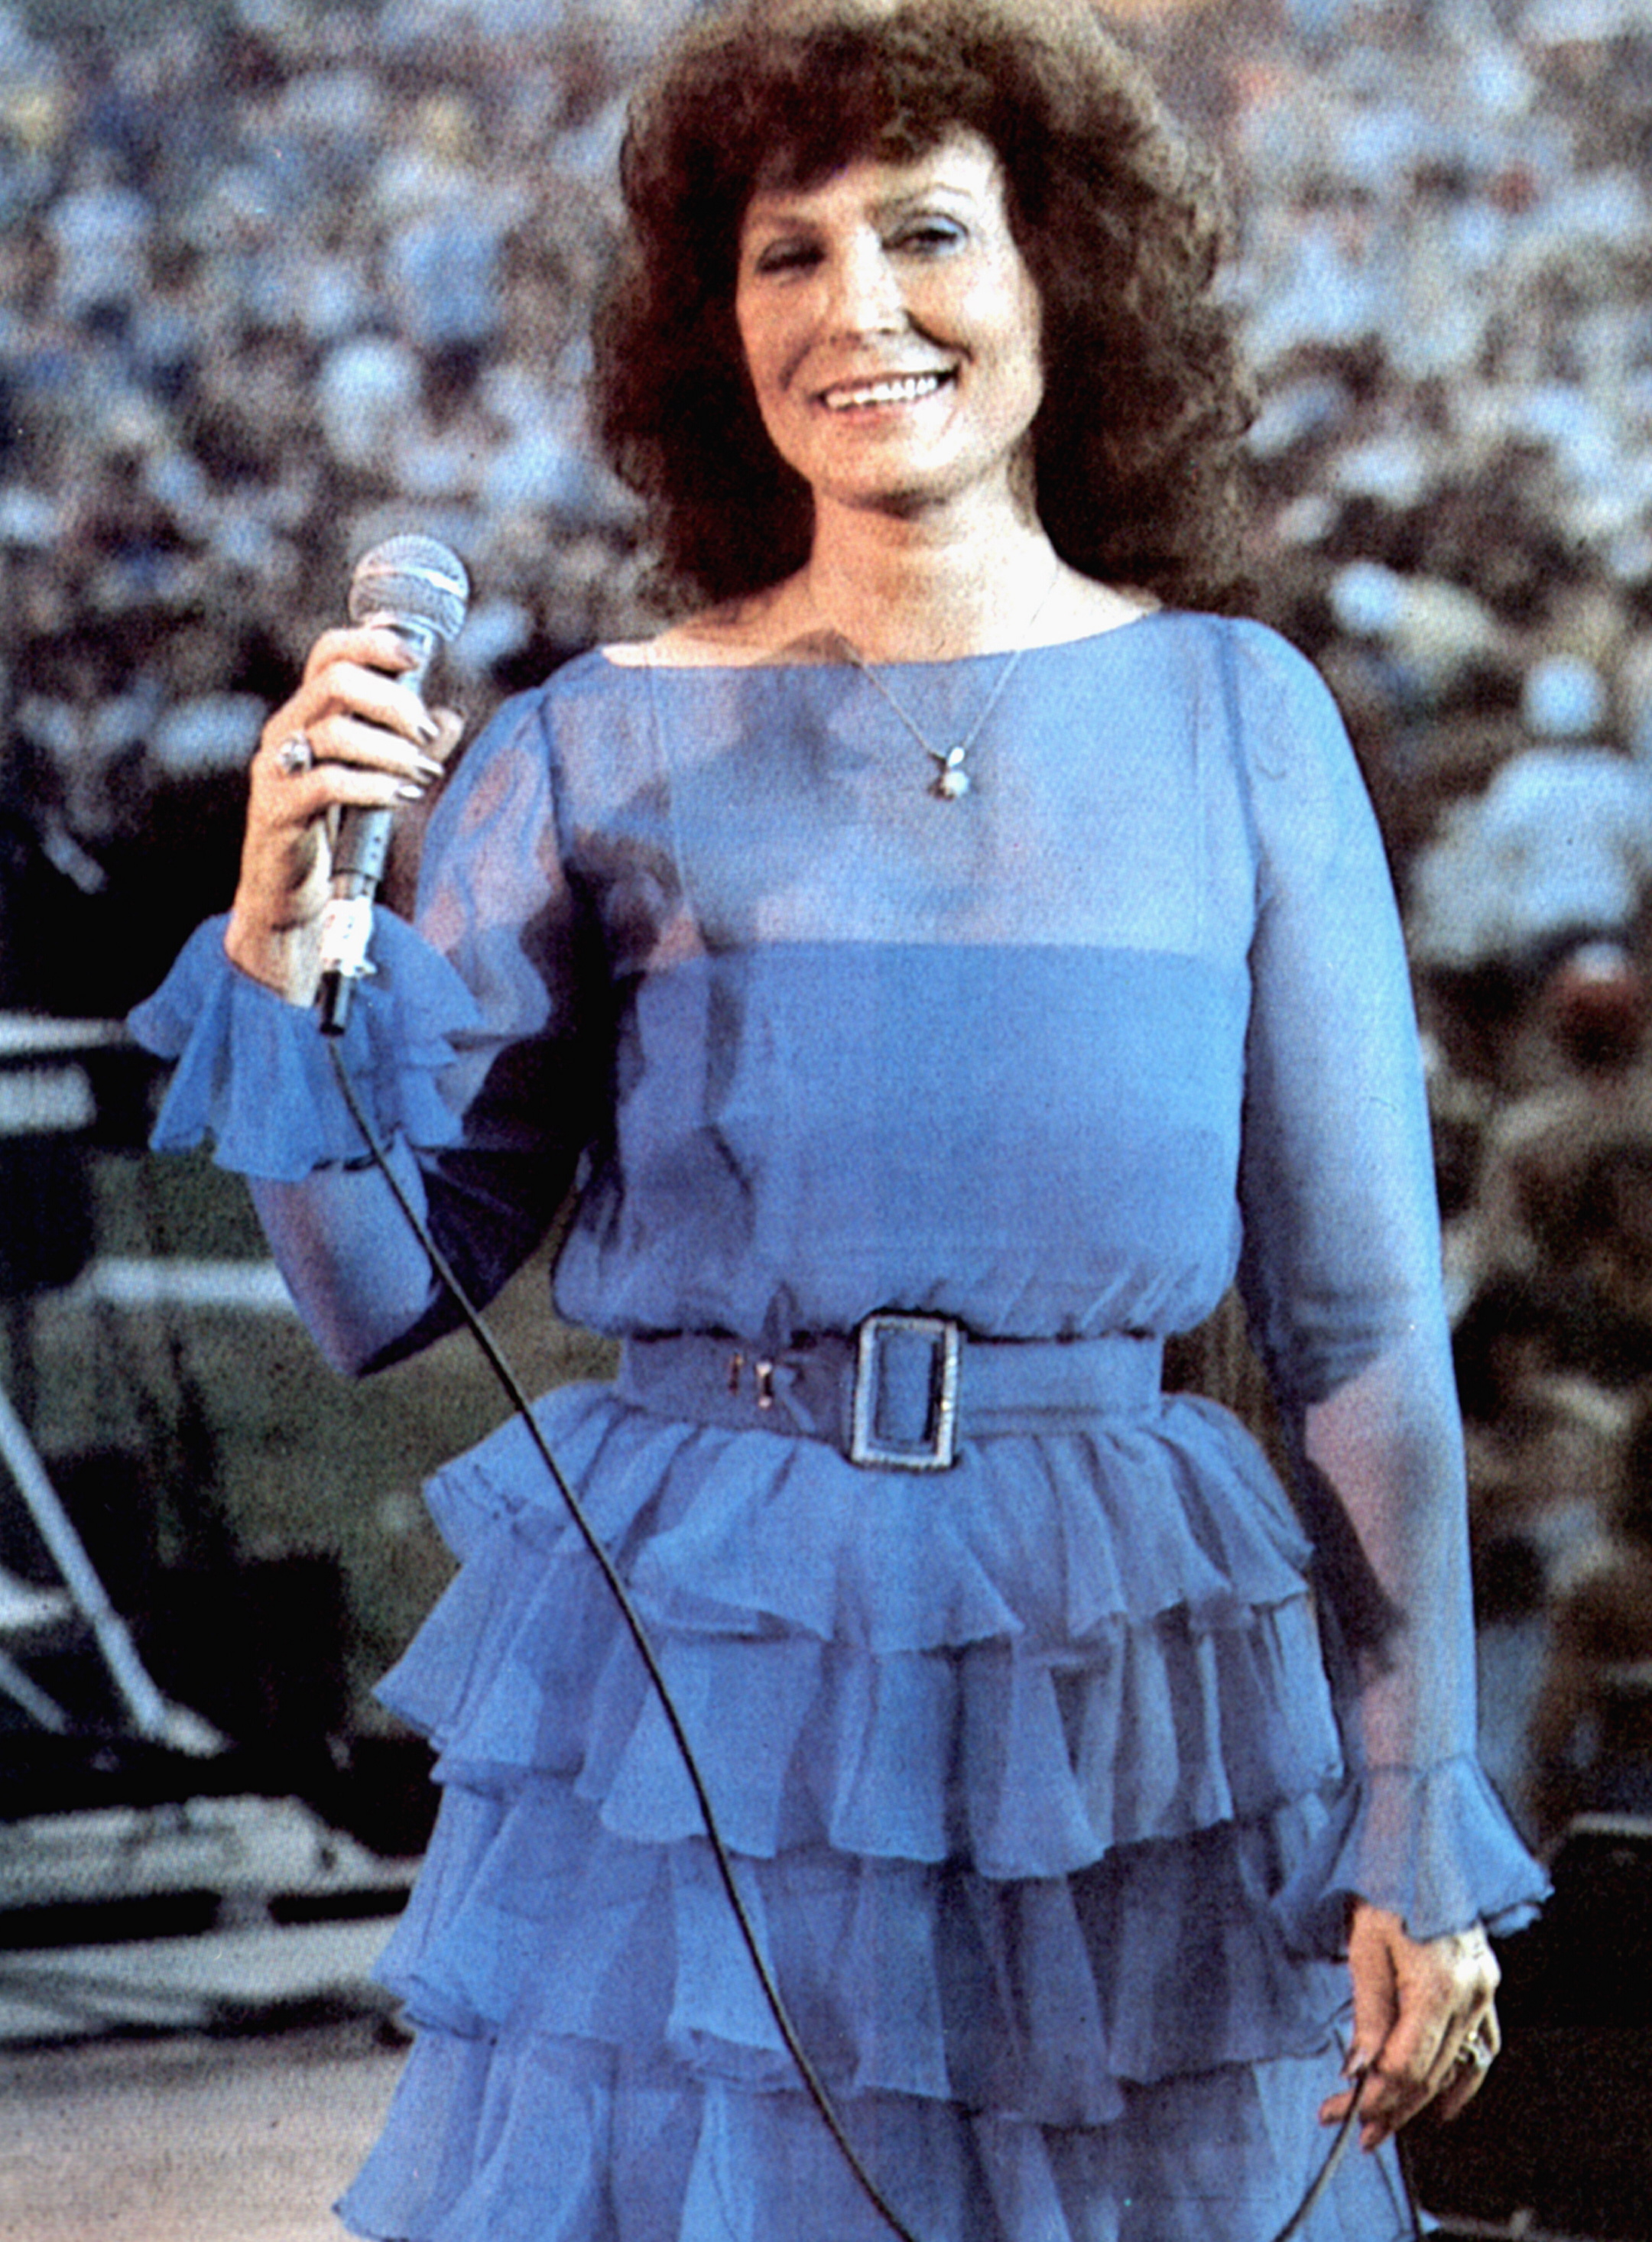 Loretta performing live in USA in 1970 | Source: Getty Images